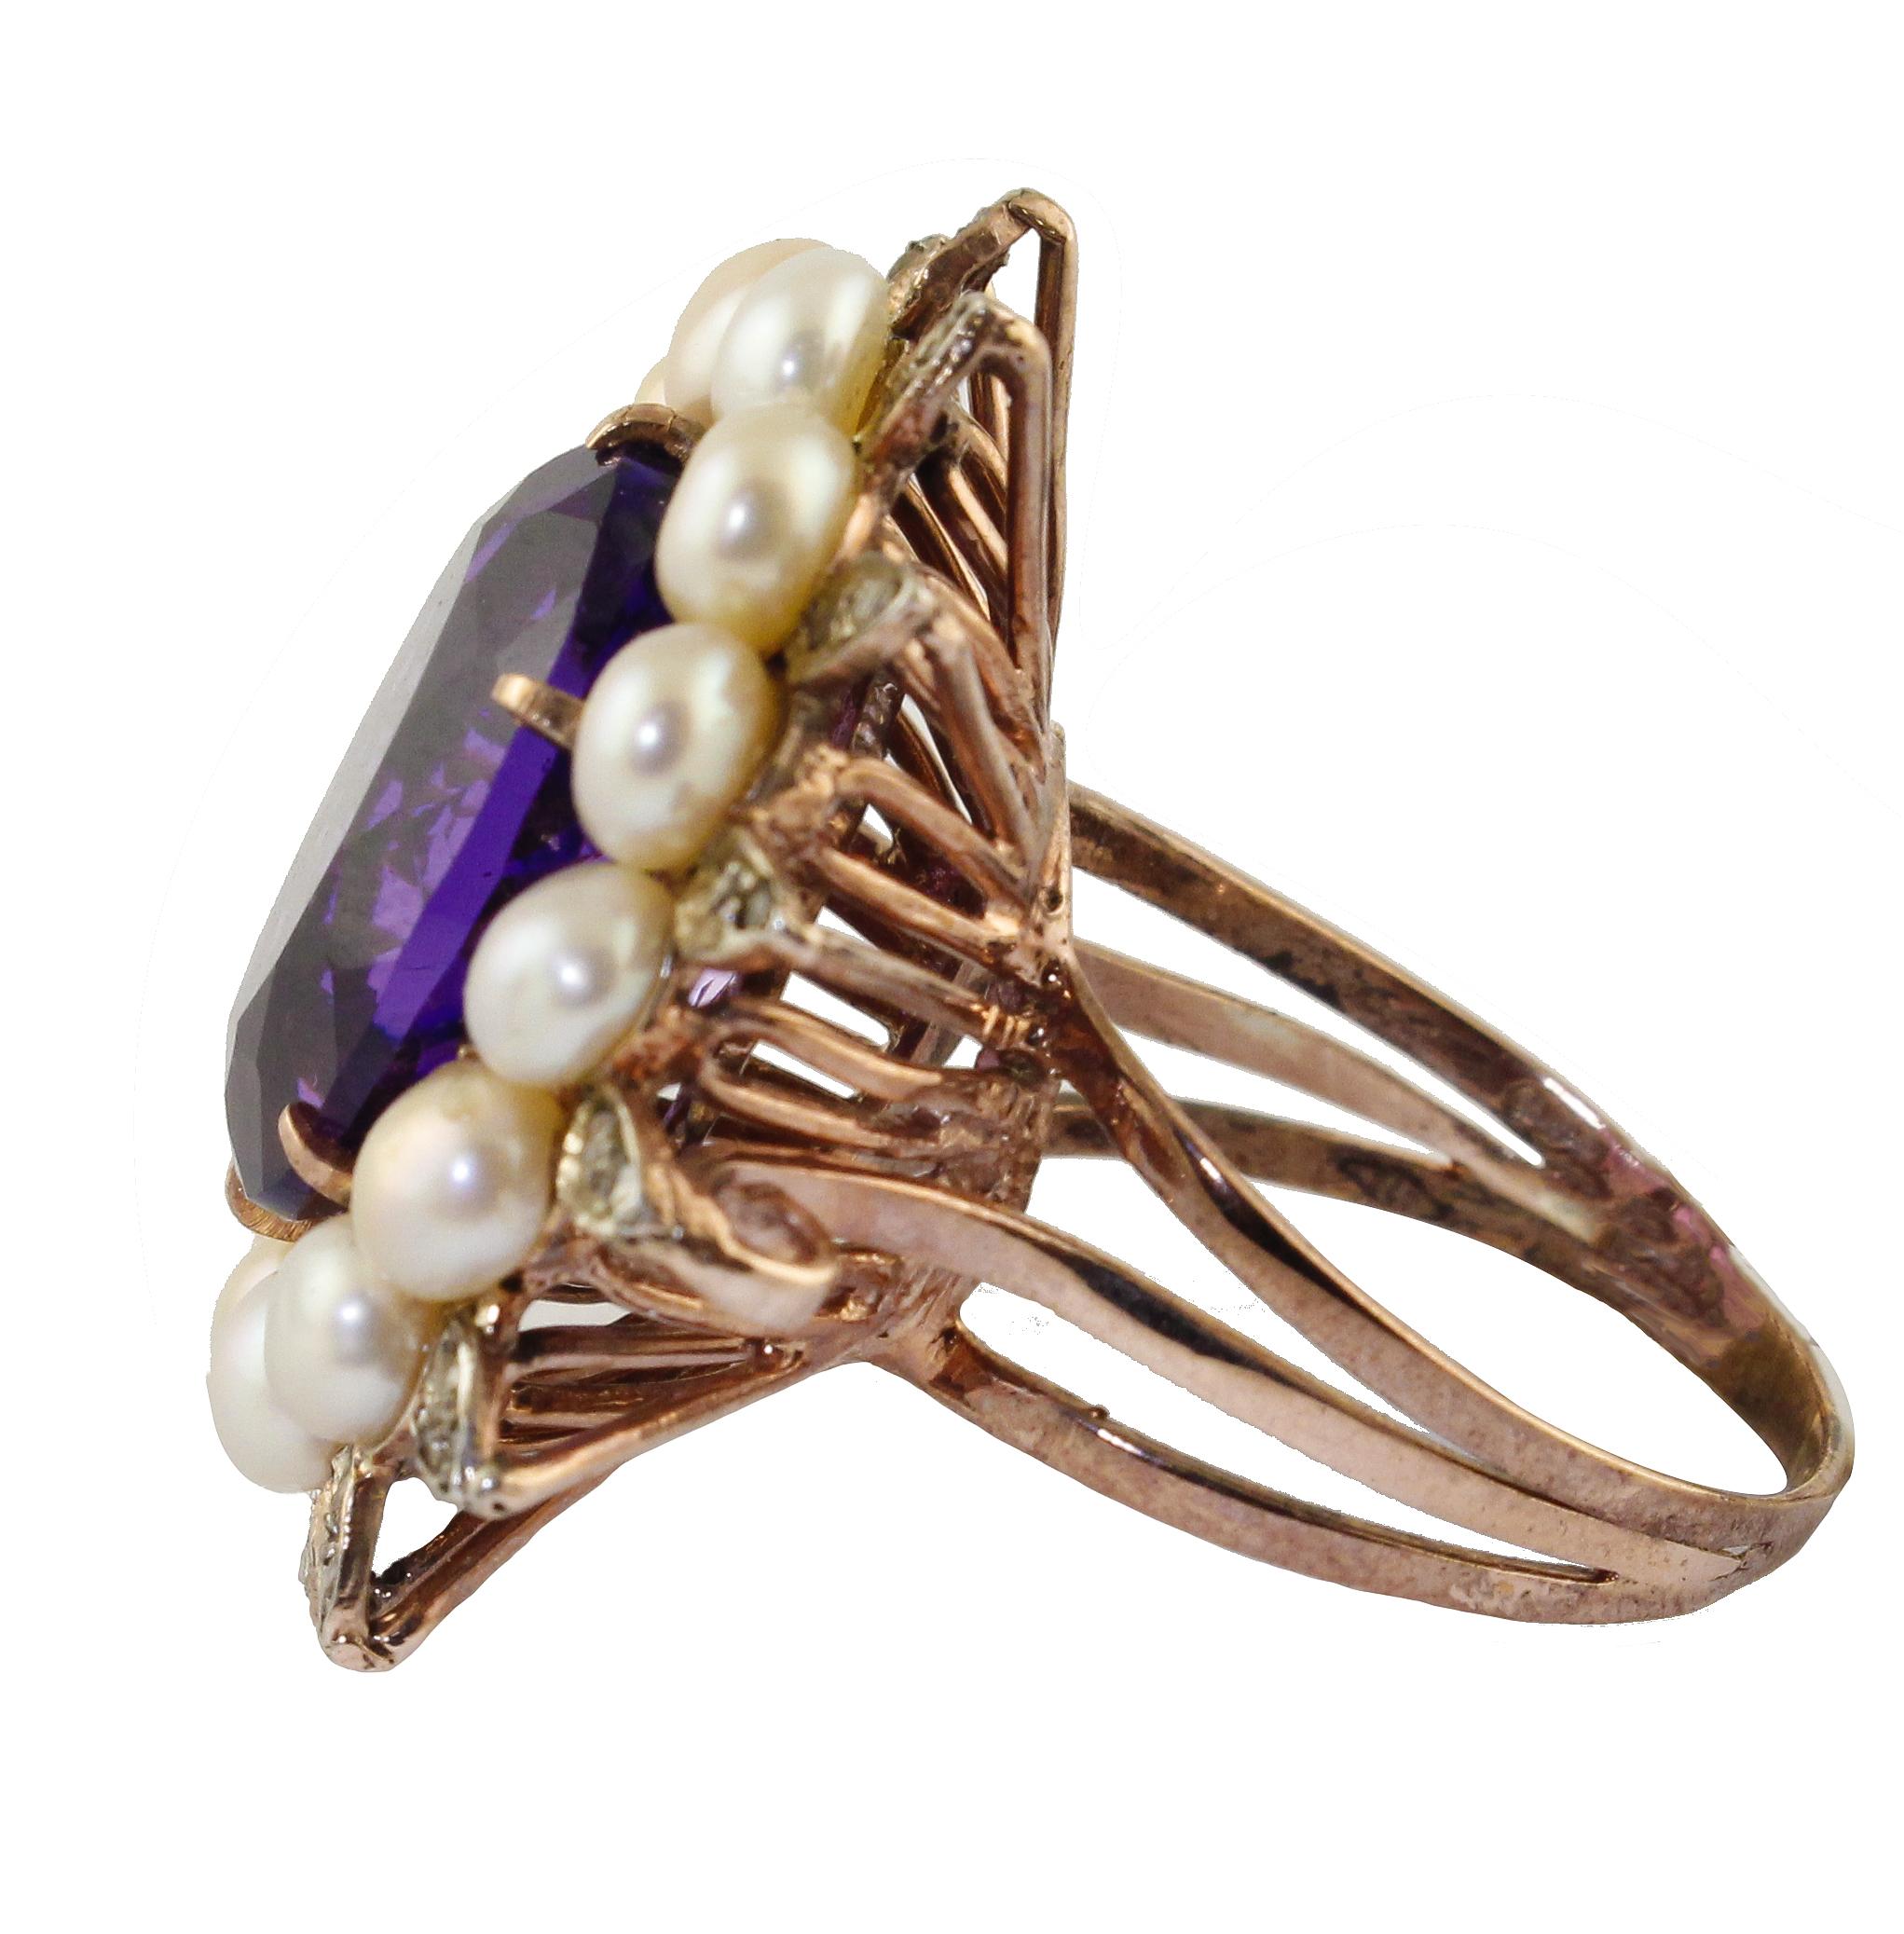 Wonderful ring in 9k rose gold structure composed by an amazing amethyst in the center surrounded by pearls crown and silver leaves studded by diamonds.
Diamonds 0.13 ct 
Pearls 1.00 g
Amethyst 1.70 g
Total weight 9.20 g
R.F * arfe
Dimentions of